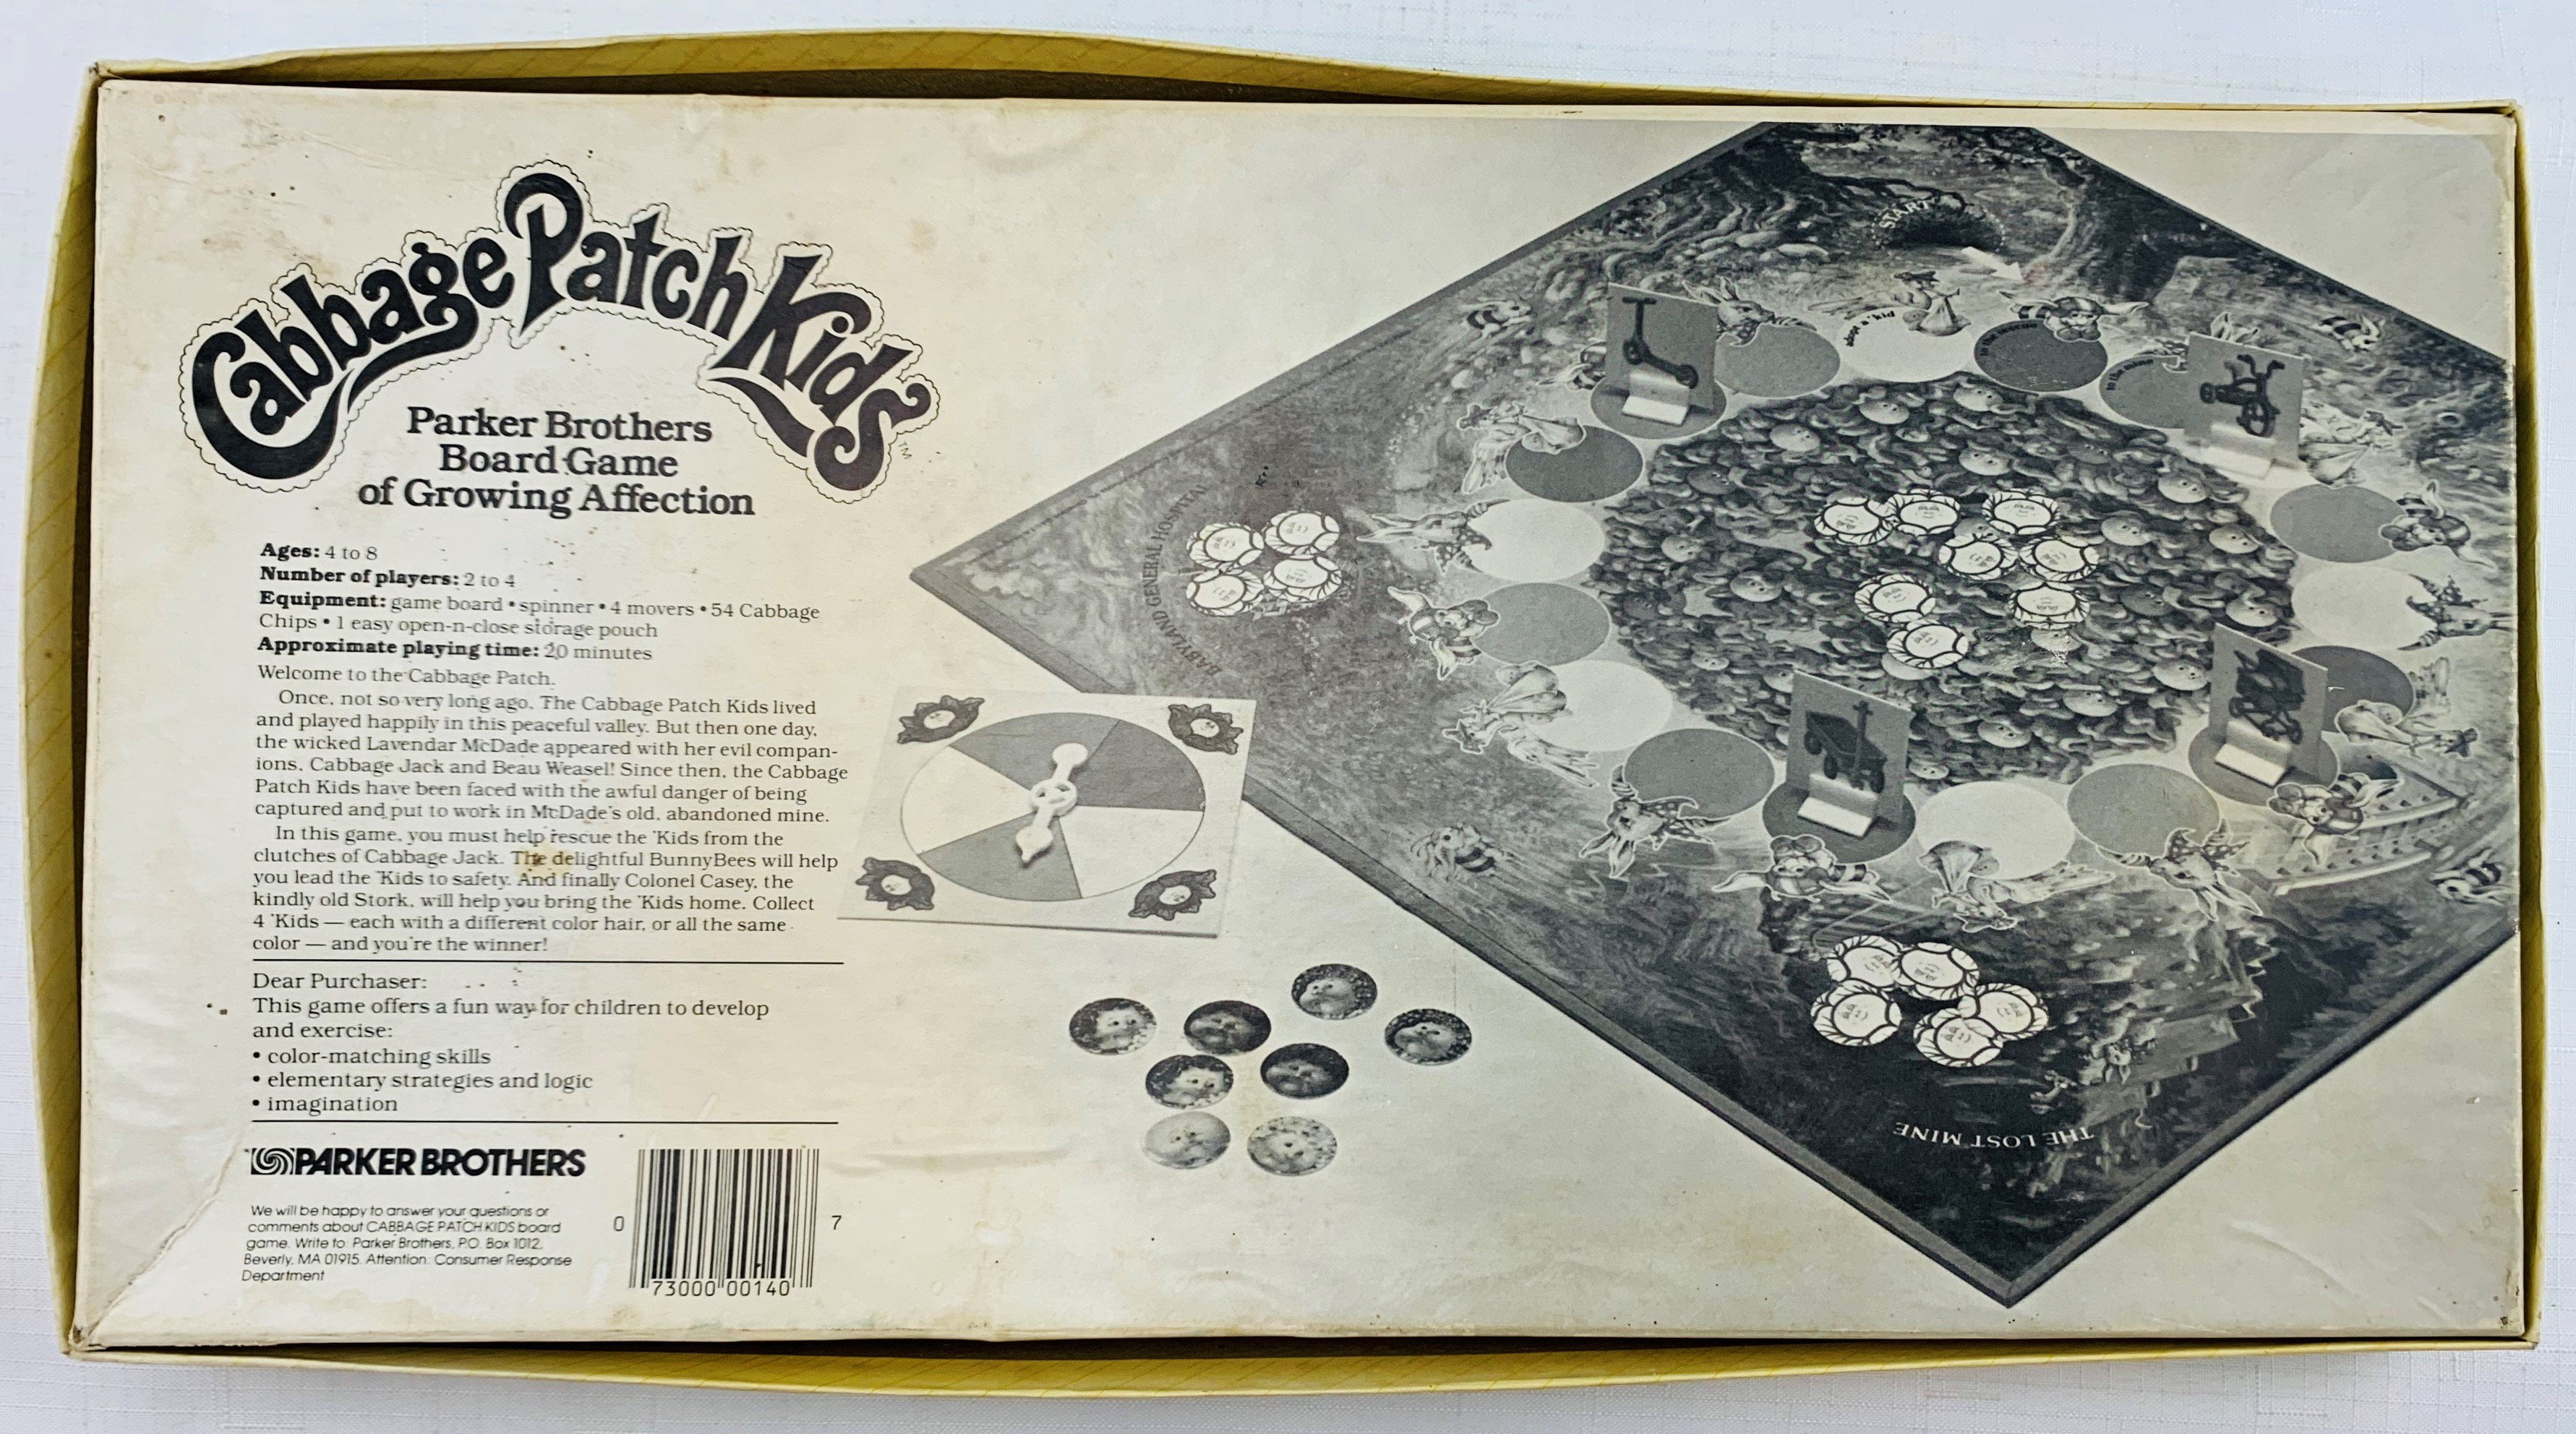 Vintage Boxed Cabbage Patch Kids Friends to The Rescue Boardgame Game 1984 0140 for sale online 